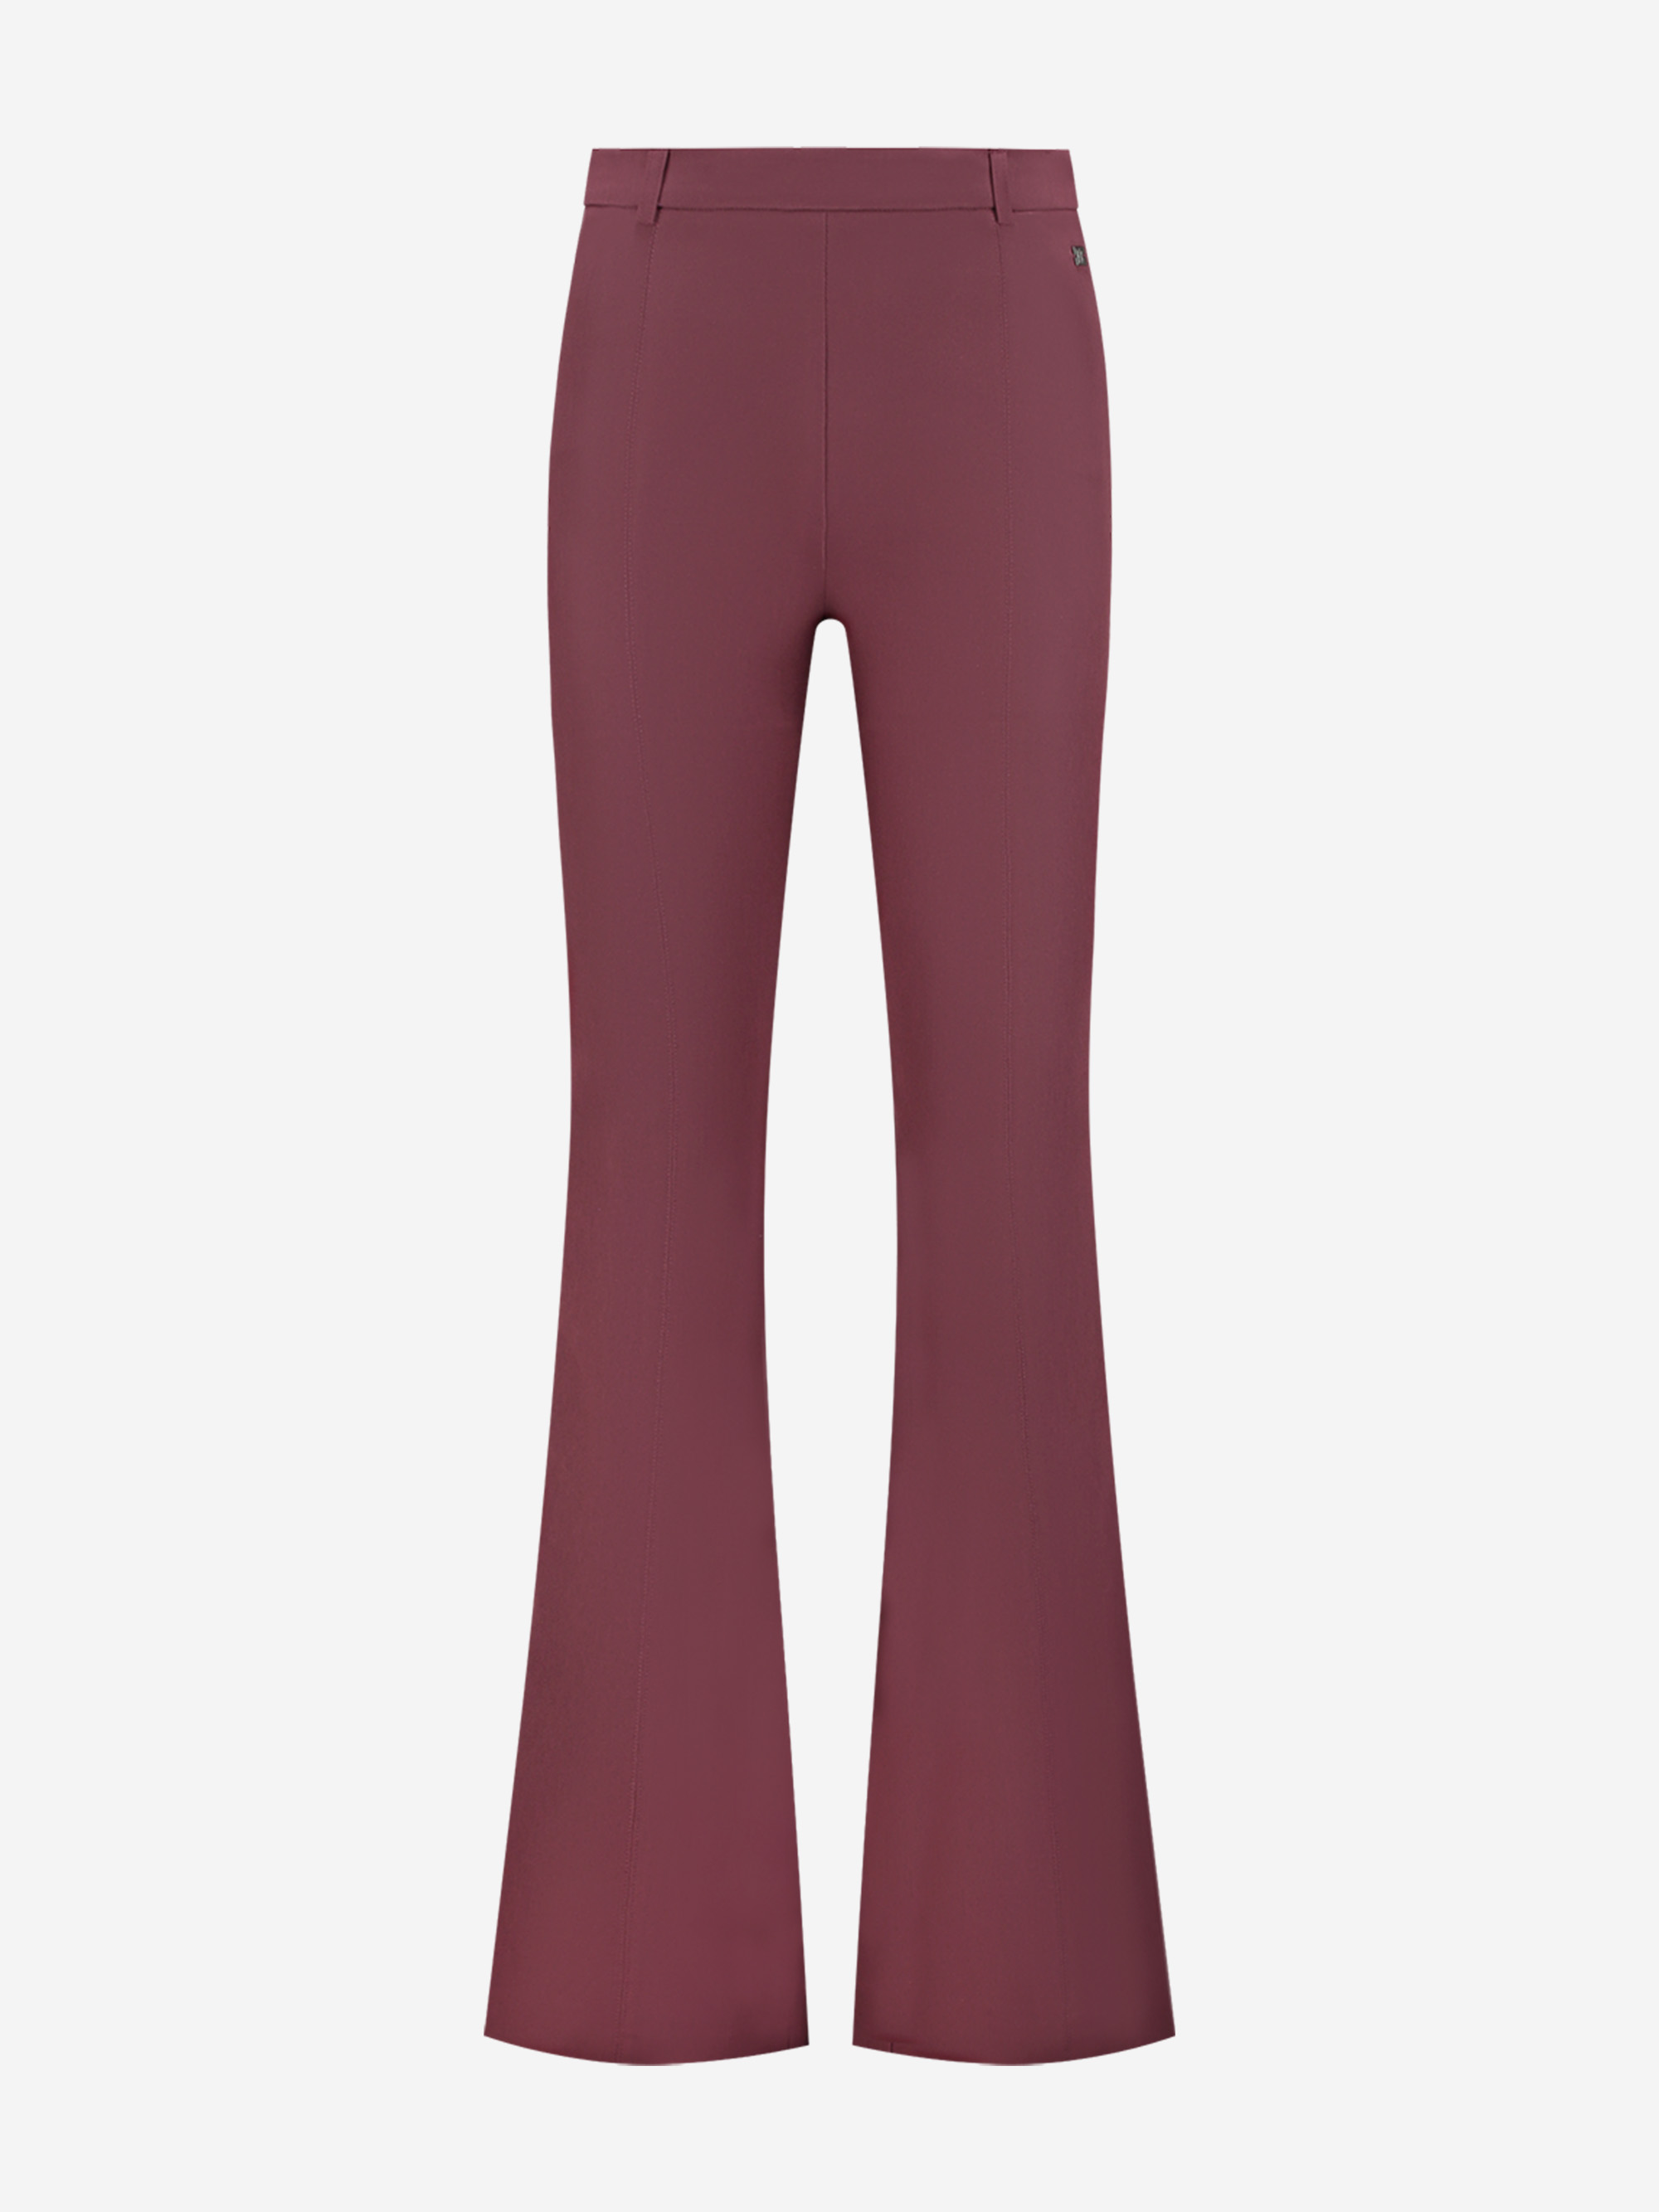 Flare pants with high rise